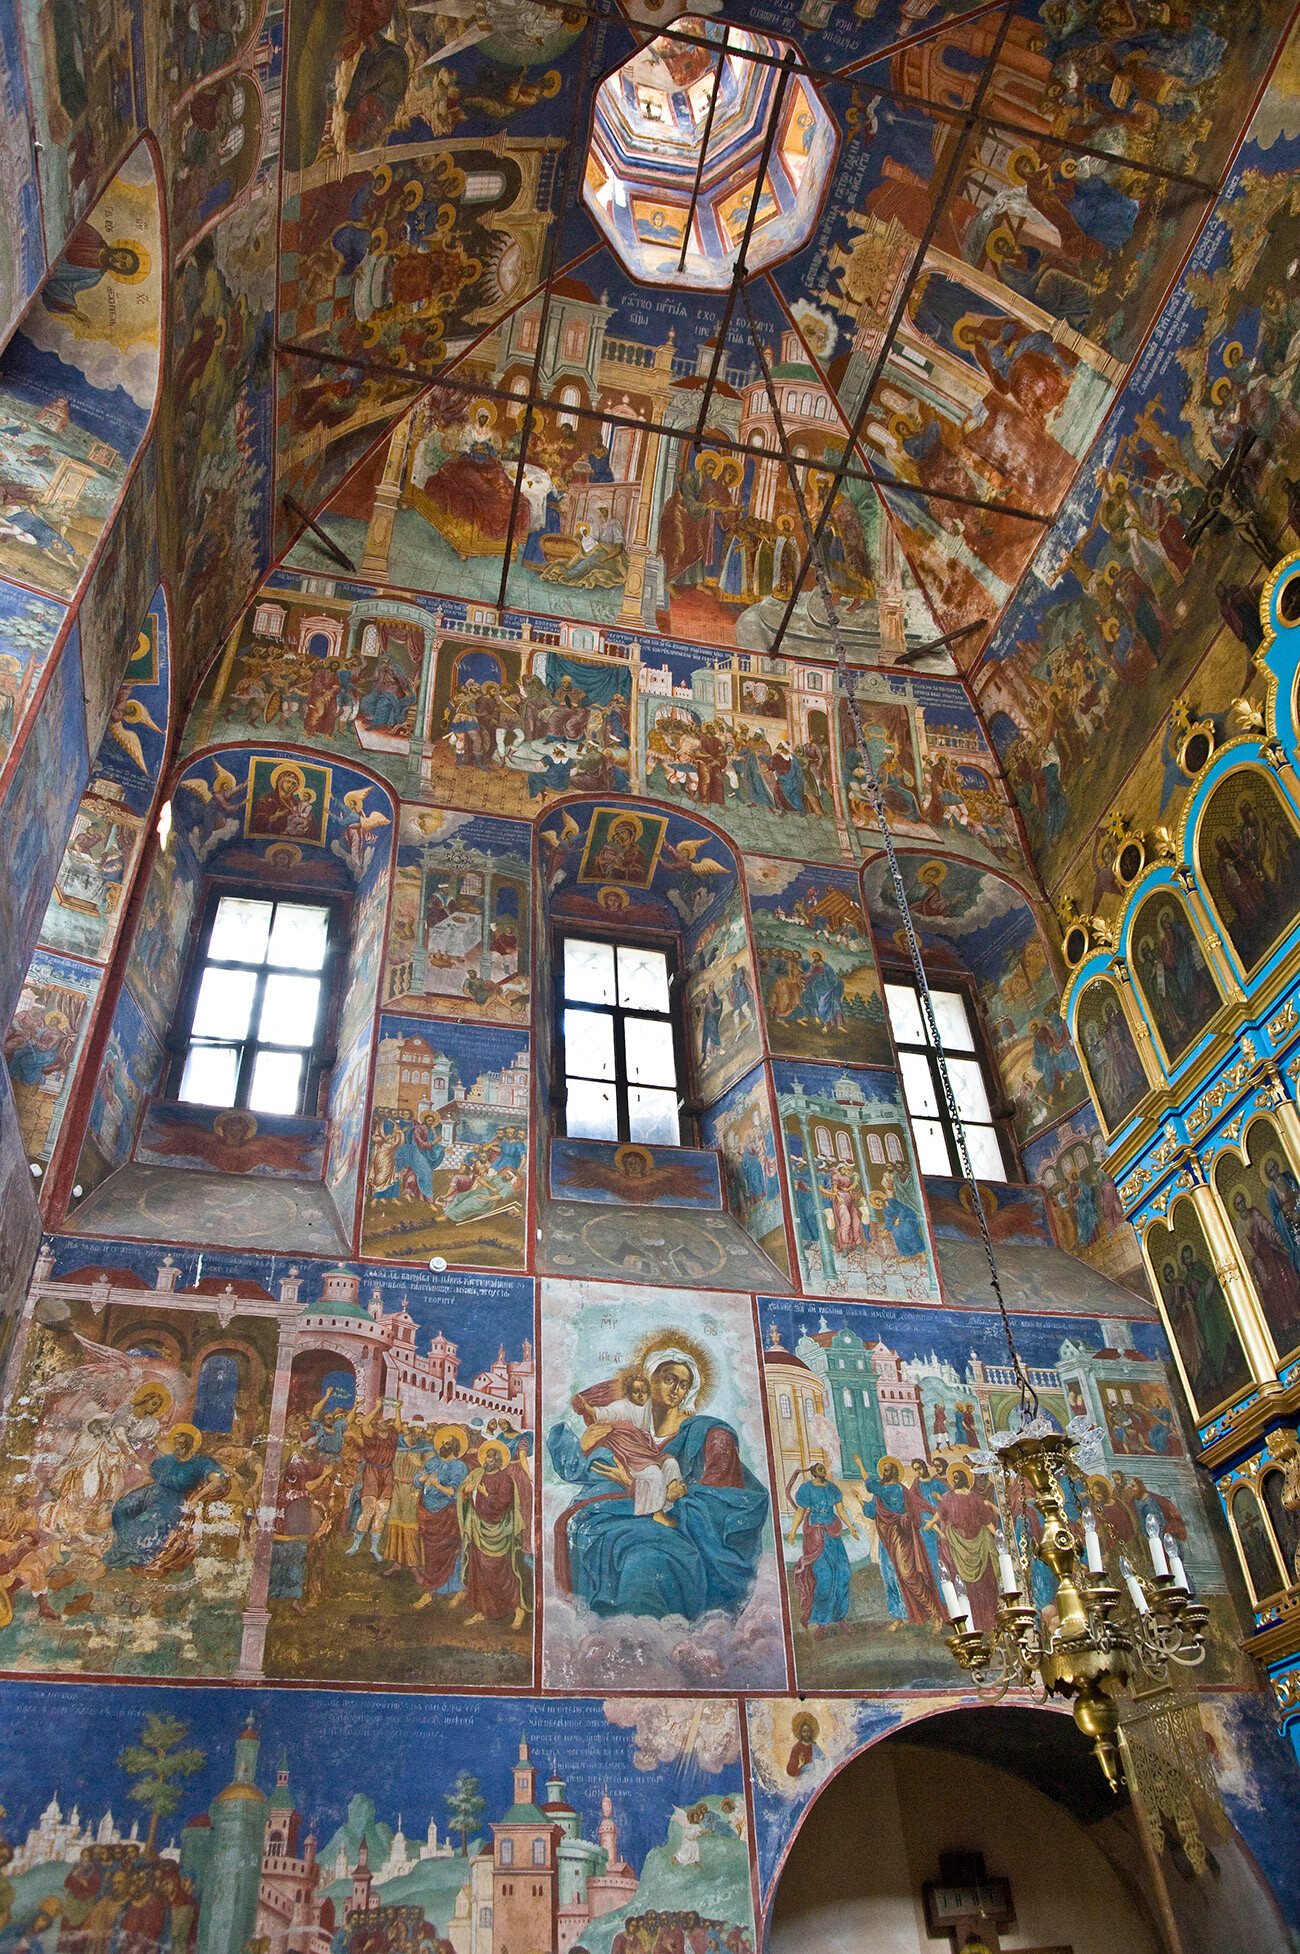 Church of Kazan Icon of the Virgin. North wall with frescoes of icons of the Virgin. August 7, 2009